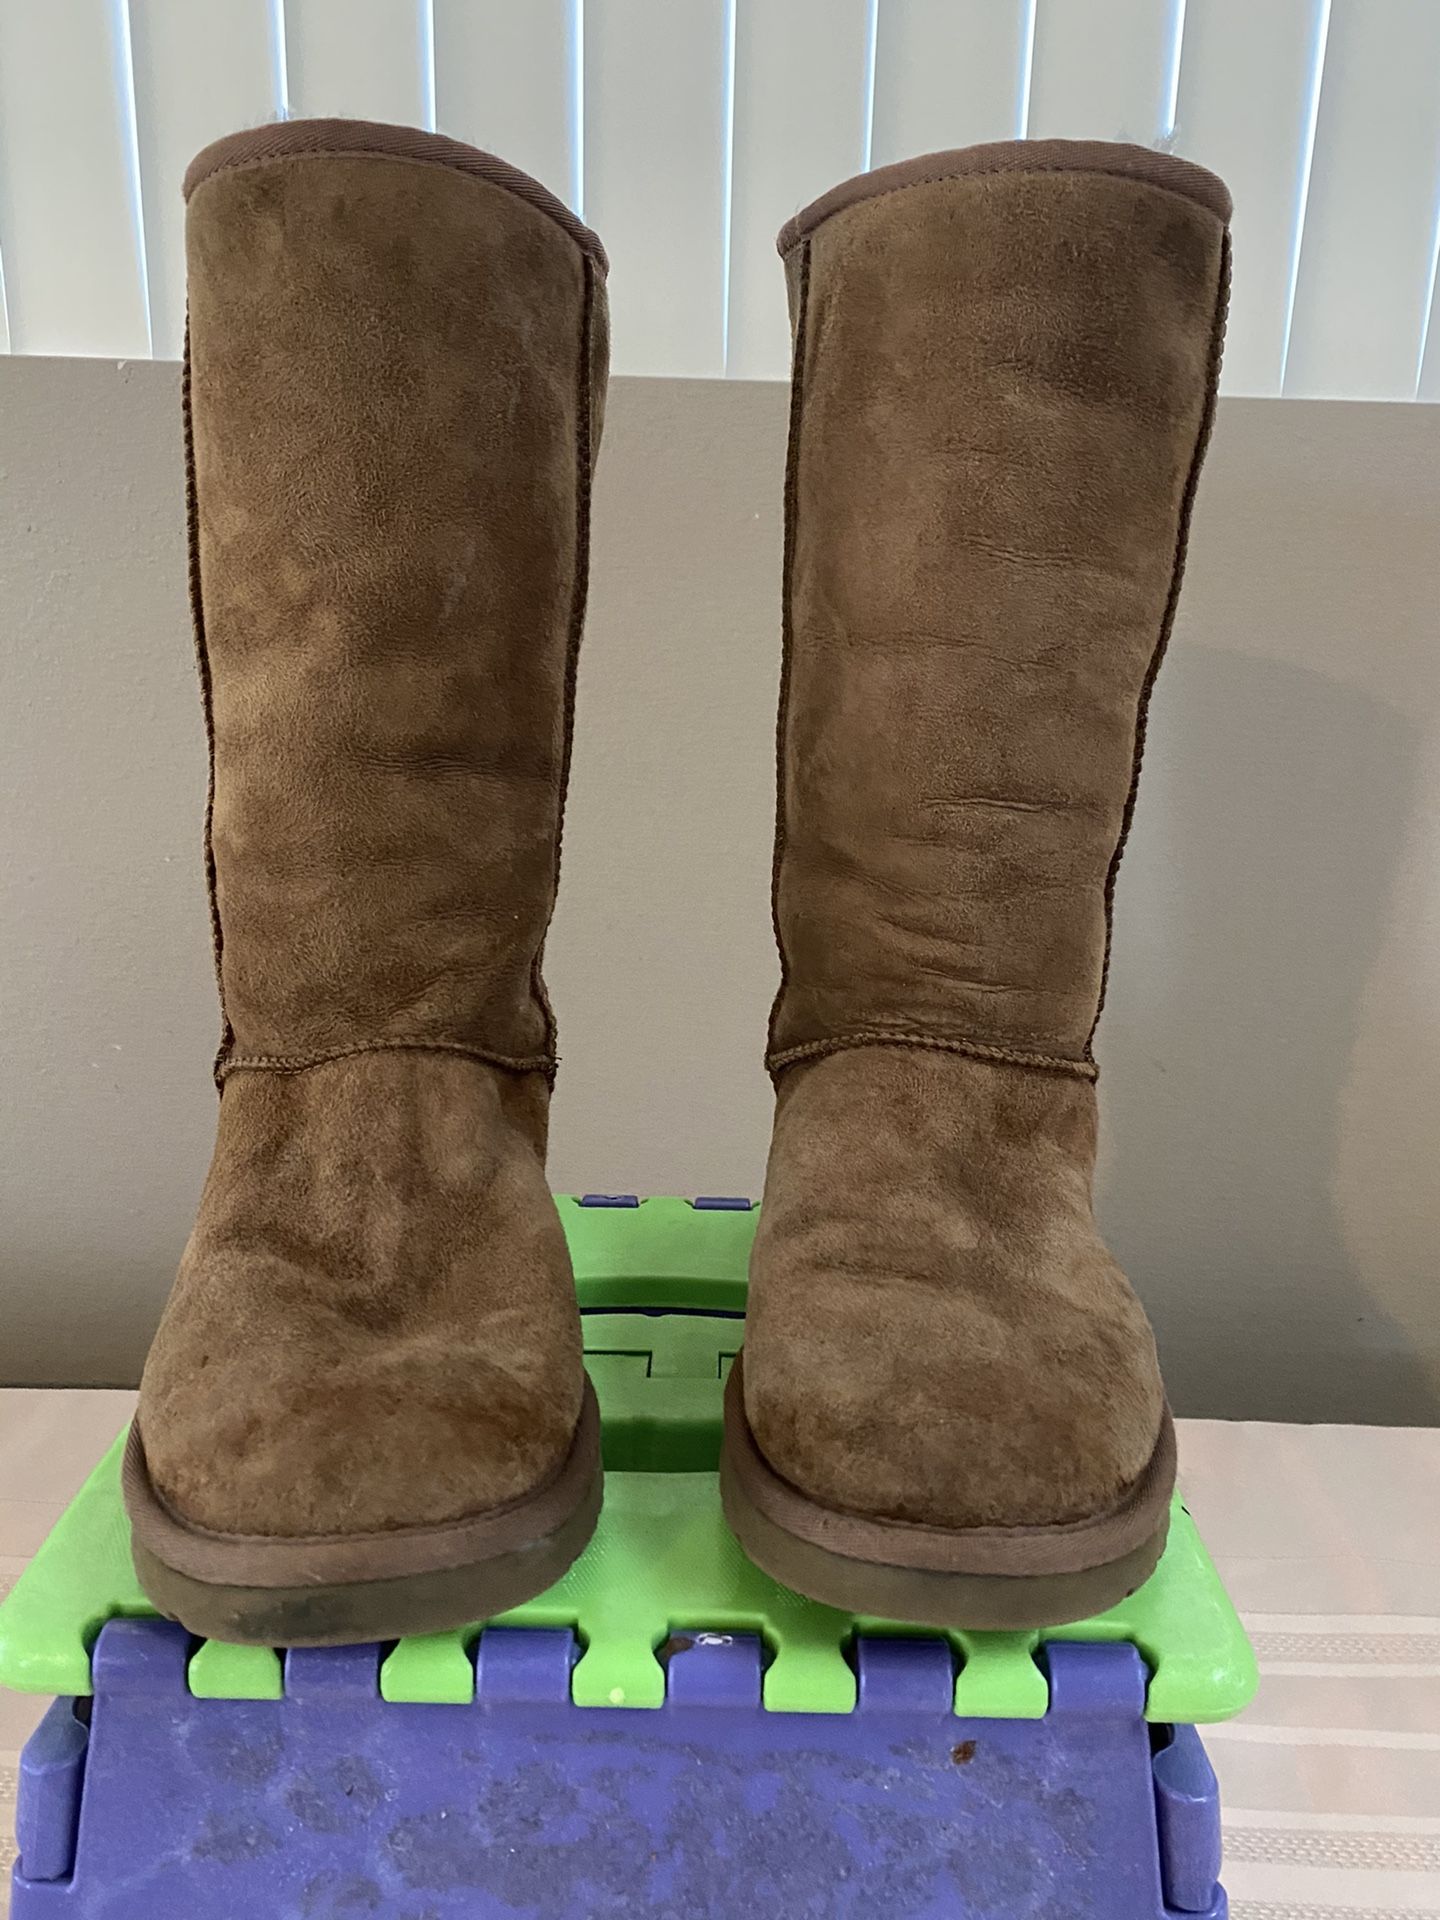 Ugg boots, size women’s 7 USA